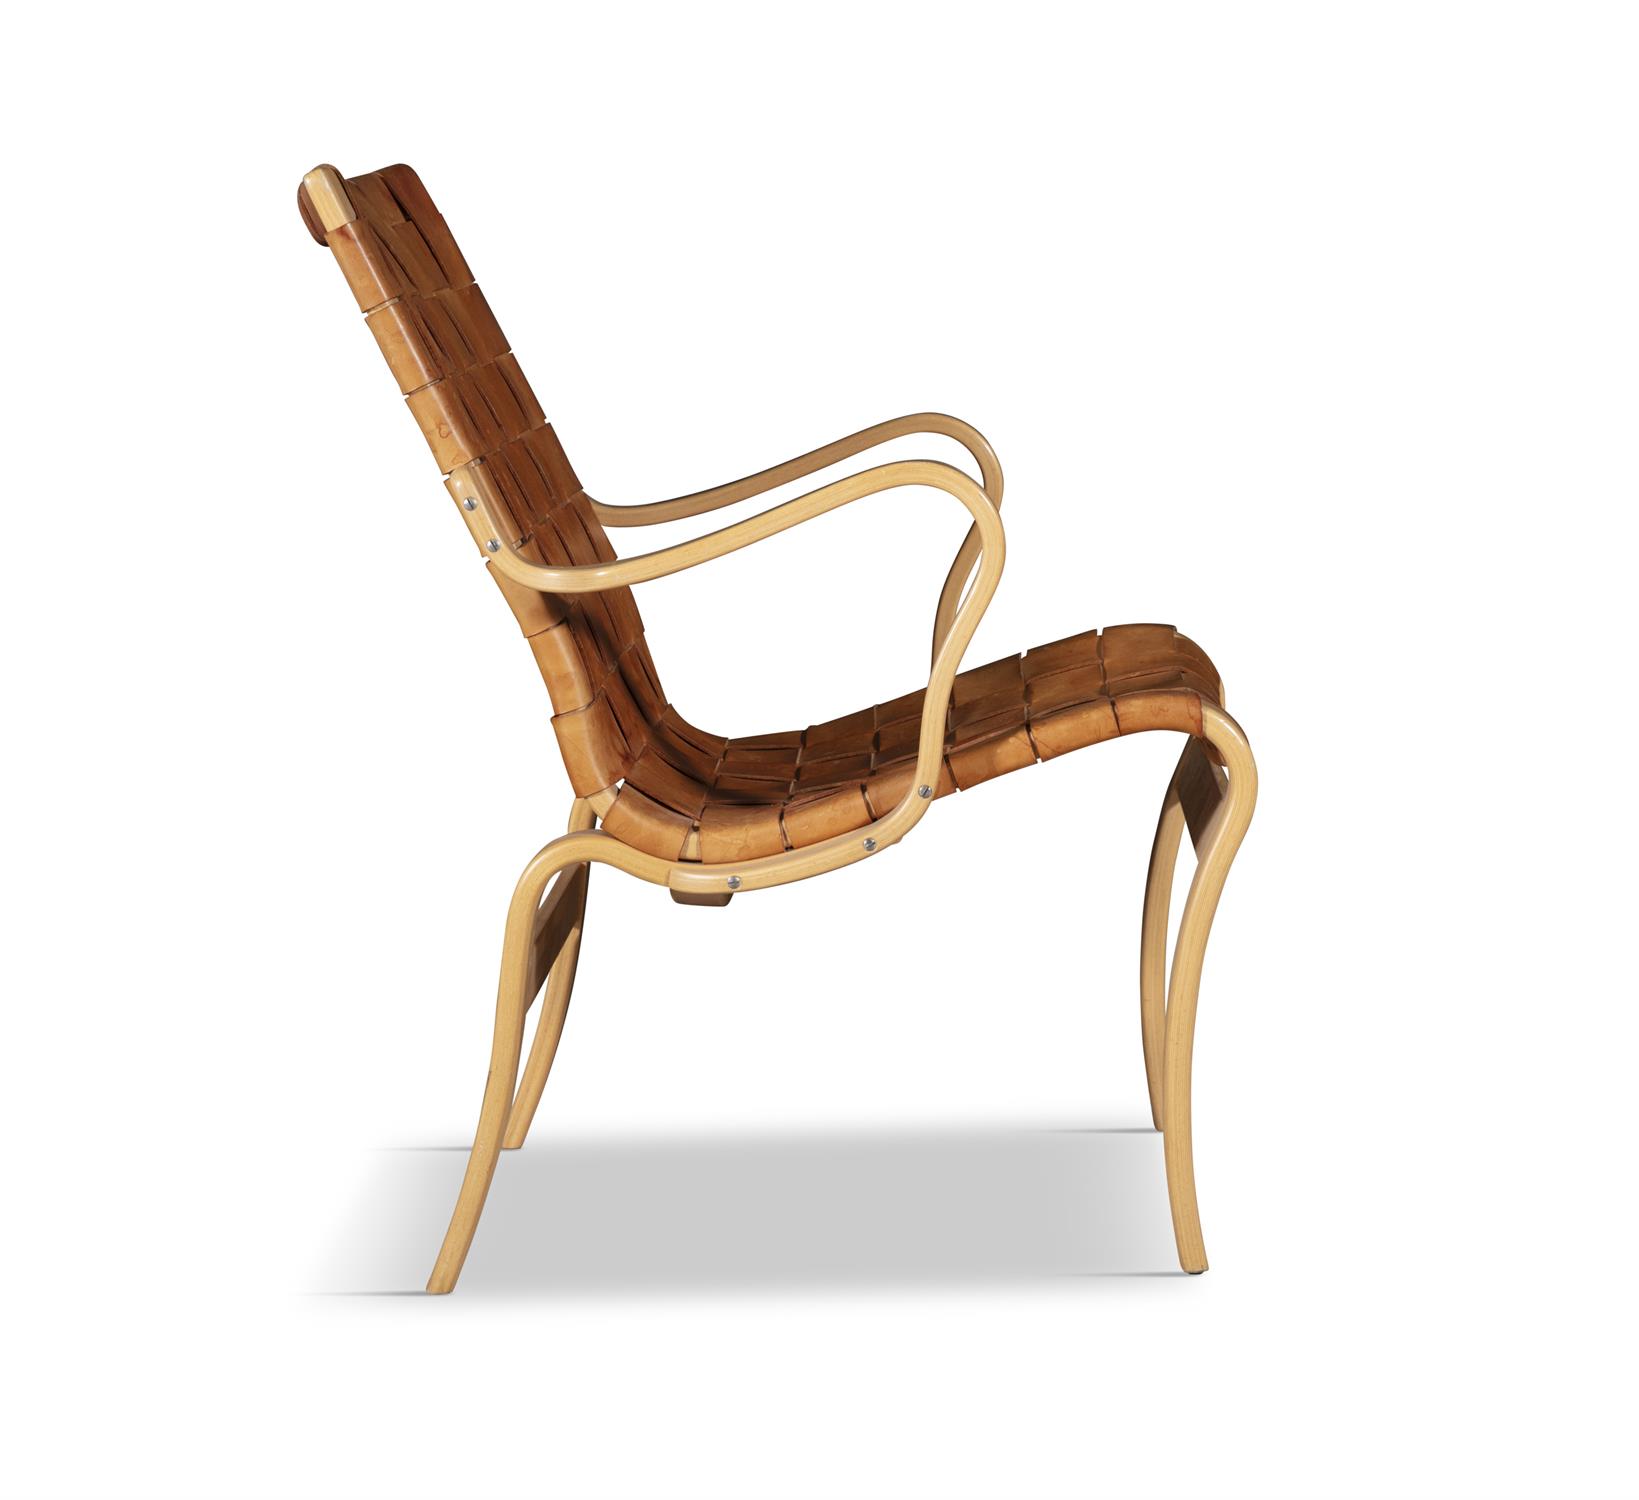 BRUNO MATHSSON Eva armchair by Bruno Mathsson in beech and leather. c.1970. 60 x 65 x 80cm(h); - Image 3 of 5